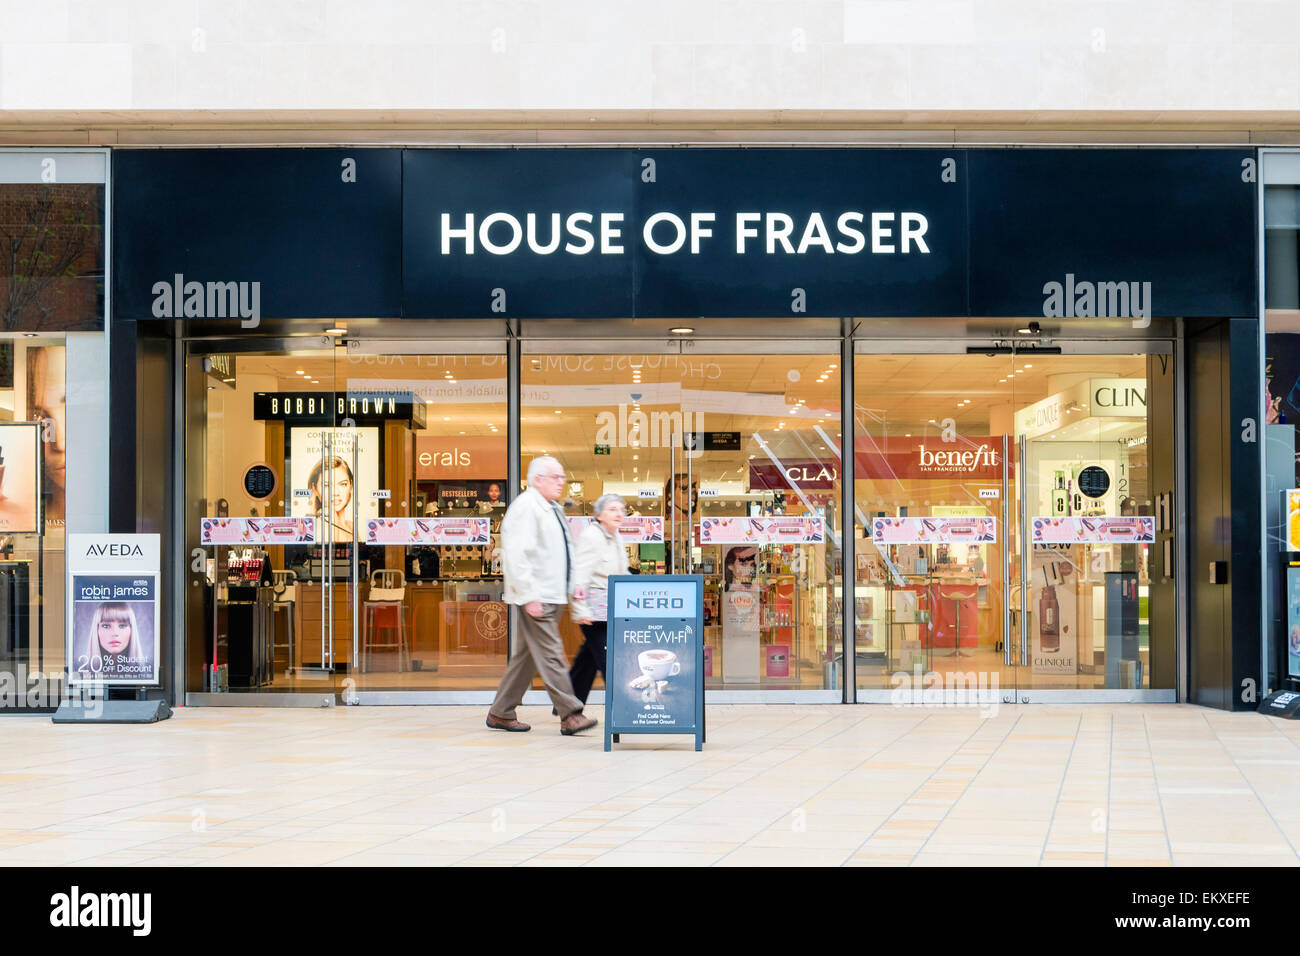 House of Fraser store, Bristol, Royaume-Uni. Banque D'Images